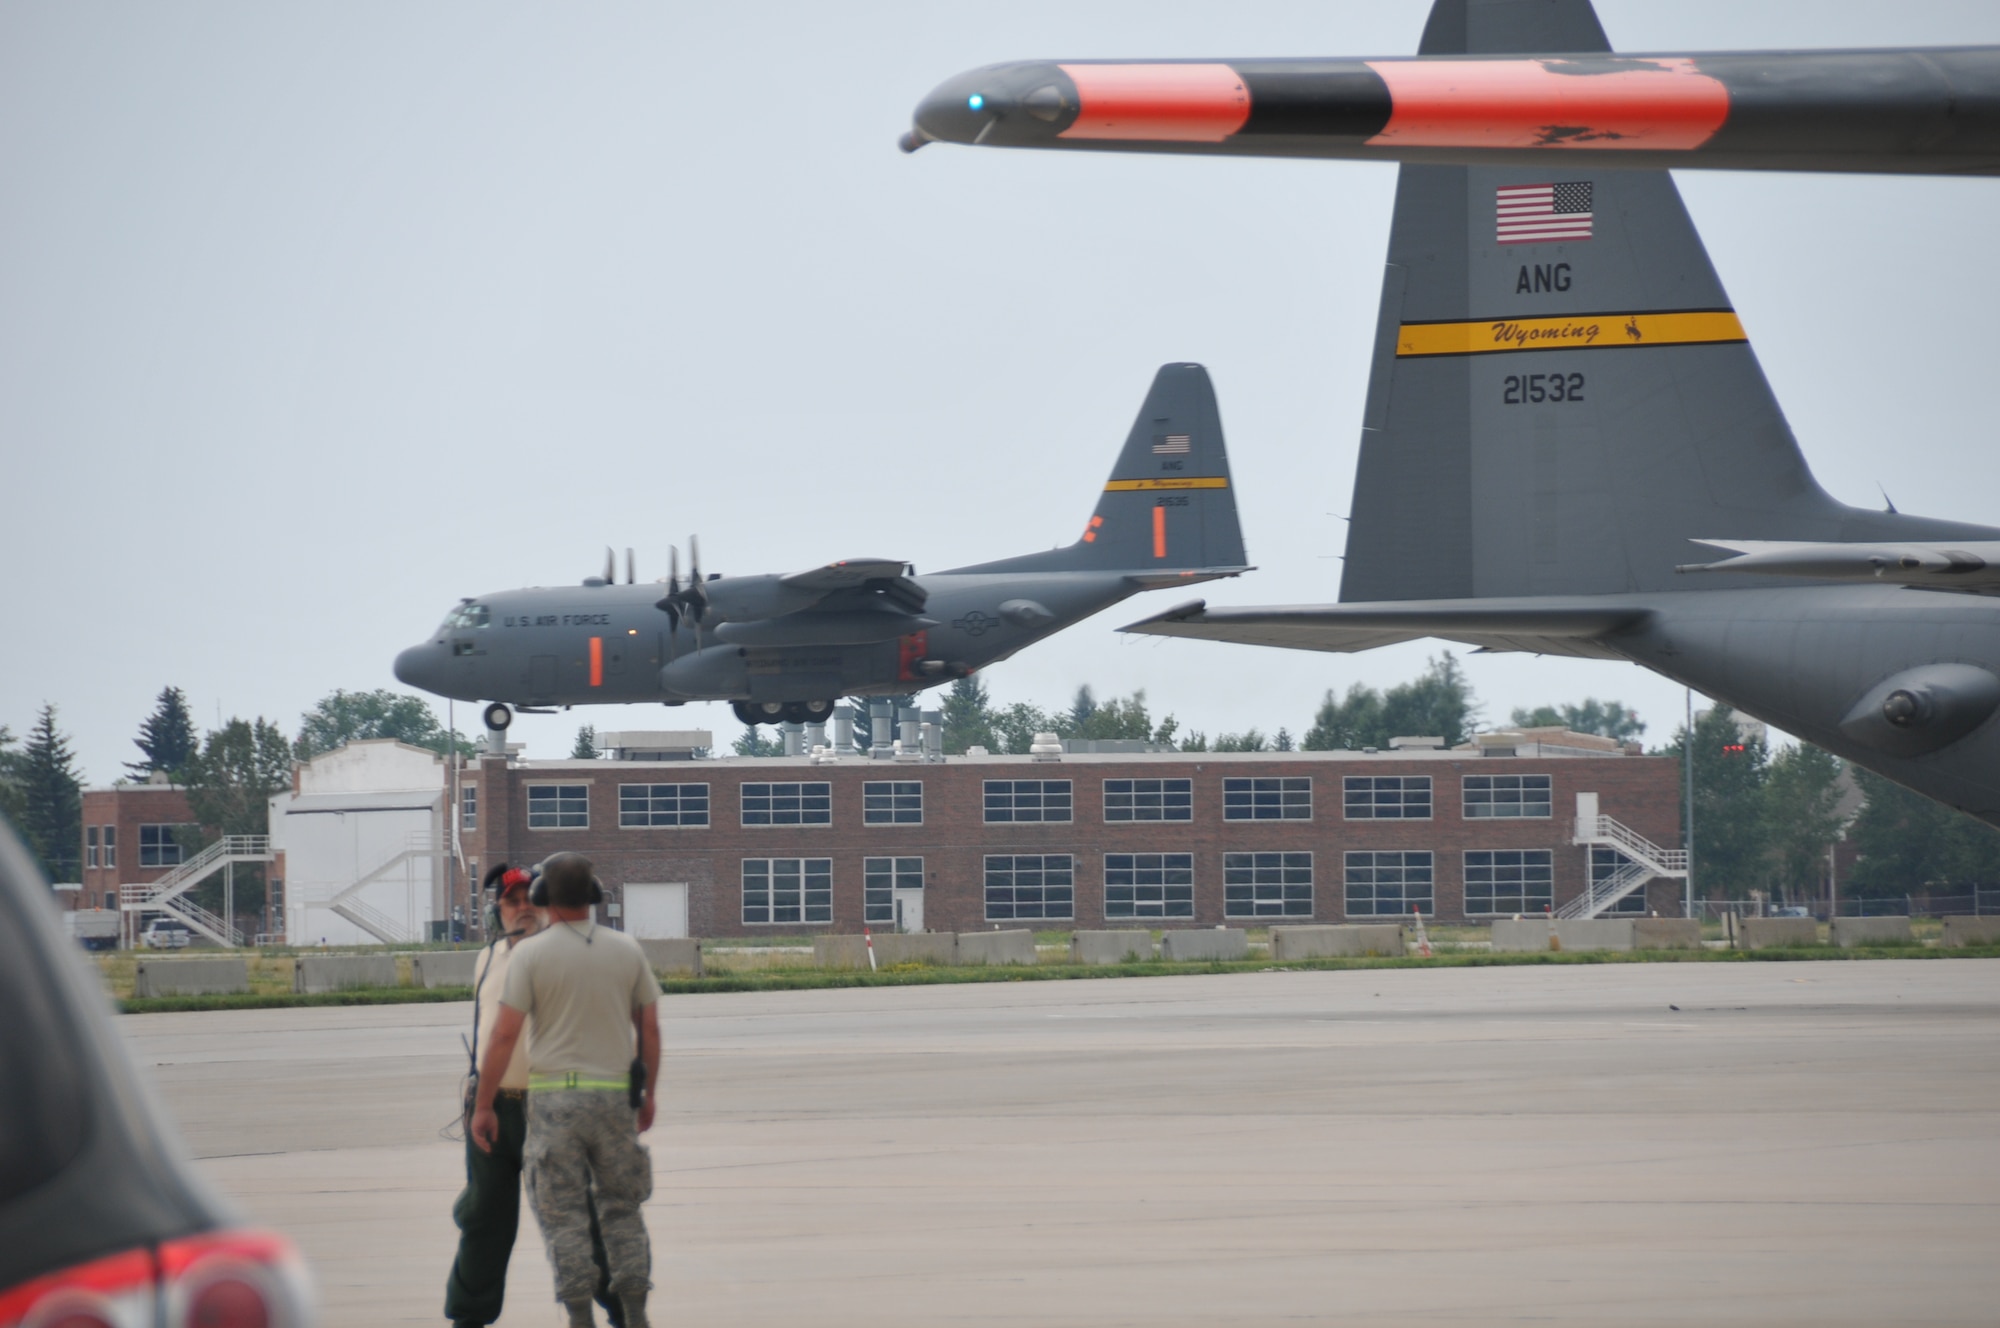 A MAFFS-equipped C-130 prepares to land at the Wyoming Air National Guard base in Cheyenne, Wyo., July 3, 2012. MAFFS aircraft continue to operate in the Rocky Mountain region to assist with firefighting efforts. (U.S. Air Force photo by Airman 1st Class Nichole Grady)